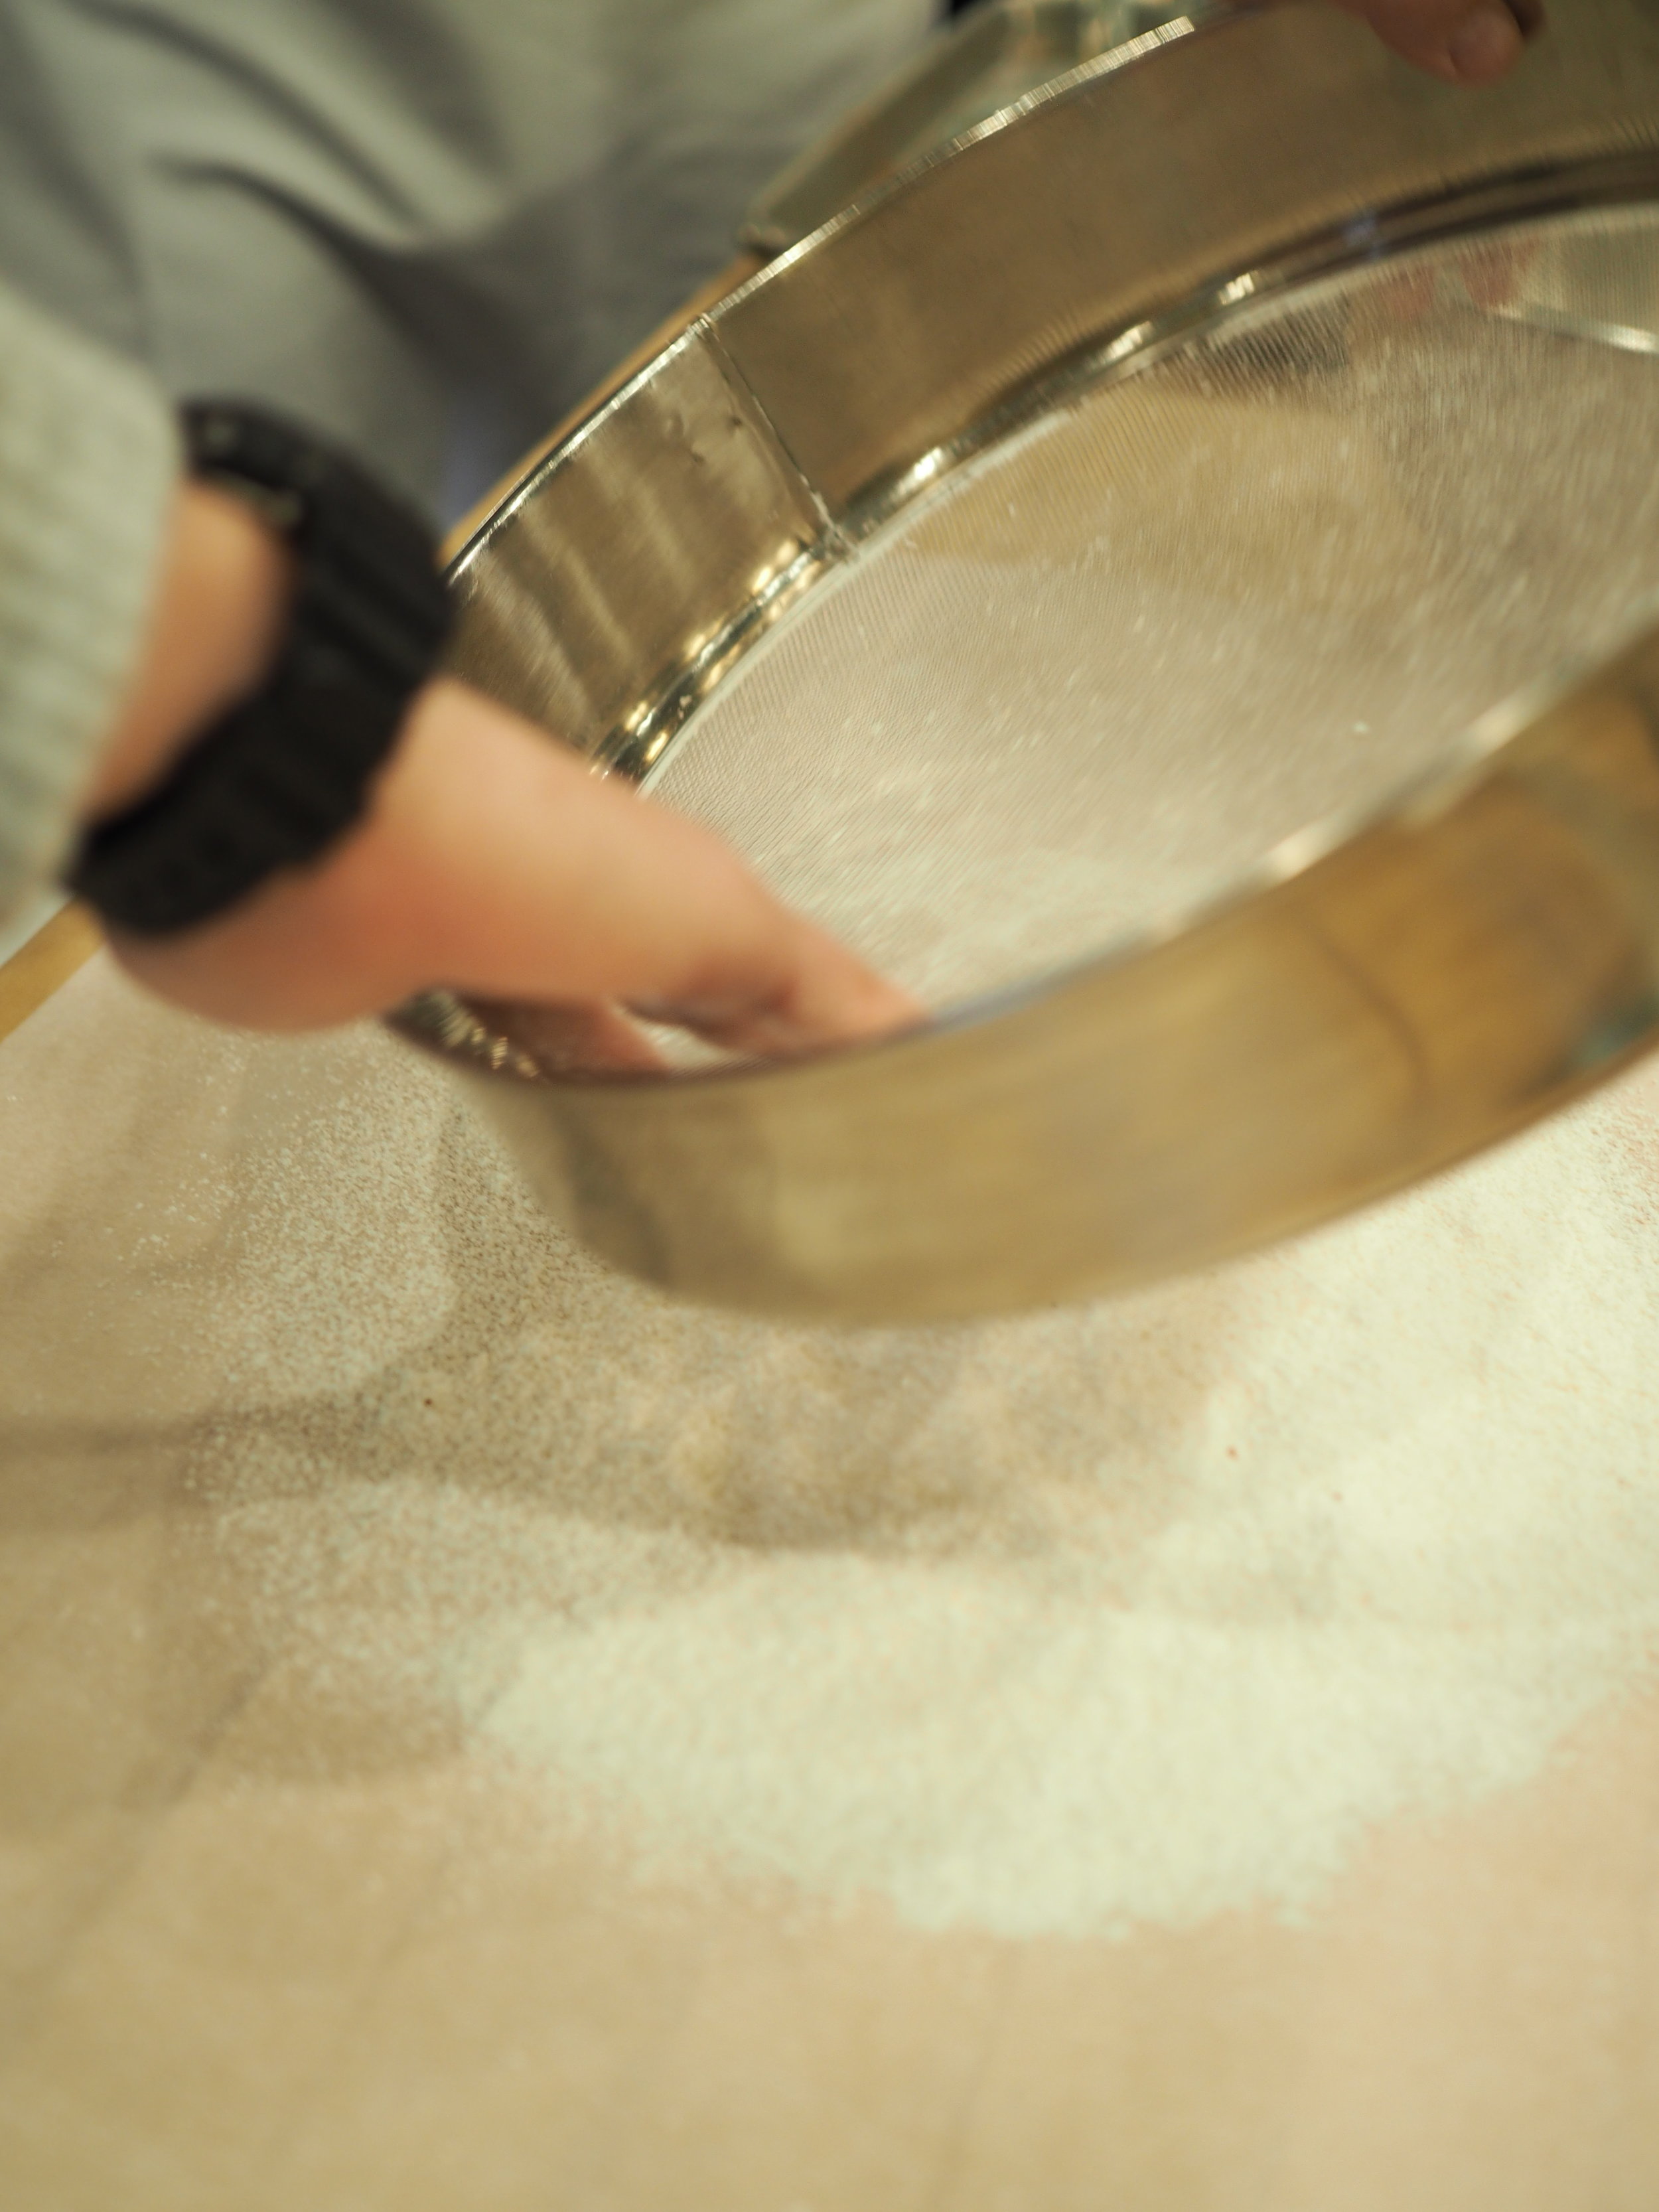 Sifting the almond flour and powdered sugar thrice